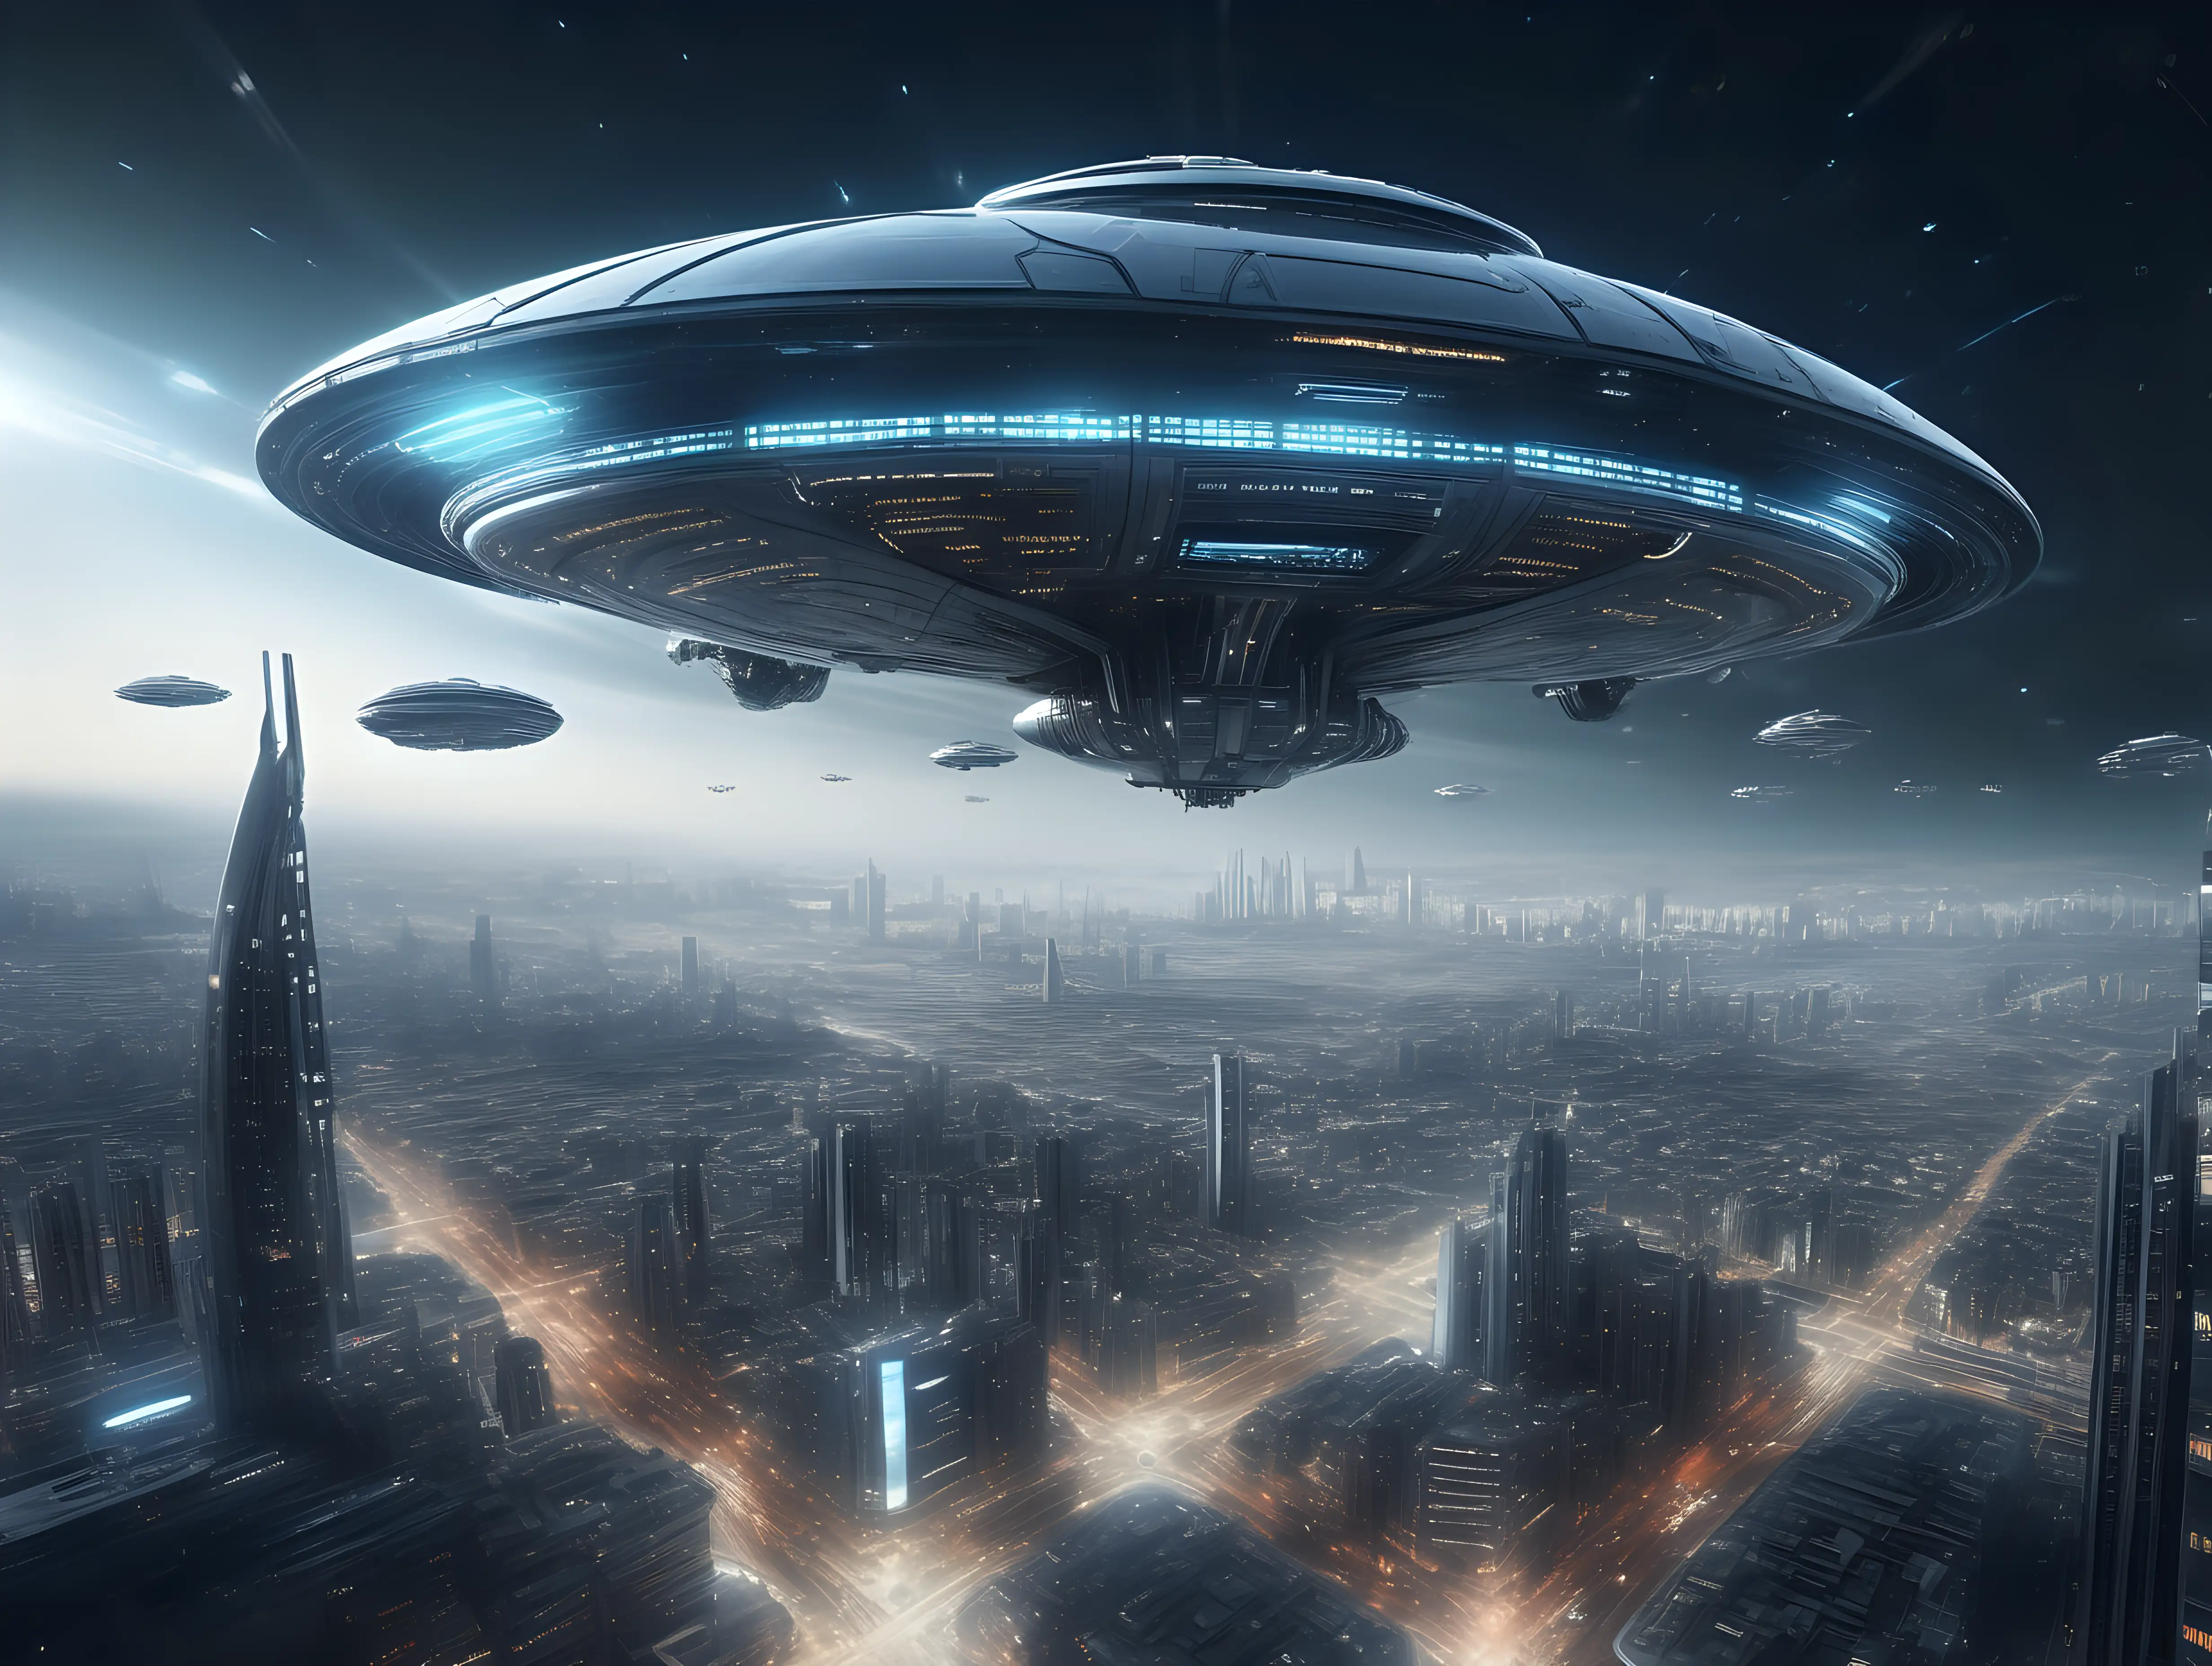 Futuristic Cityscape with Hovering Spaceship at Night